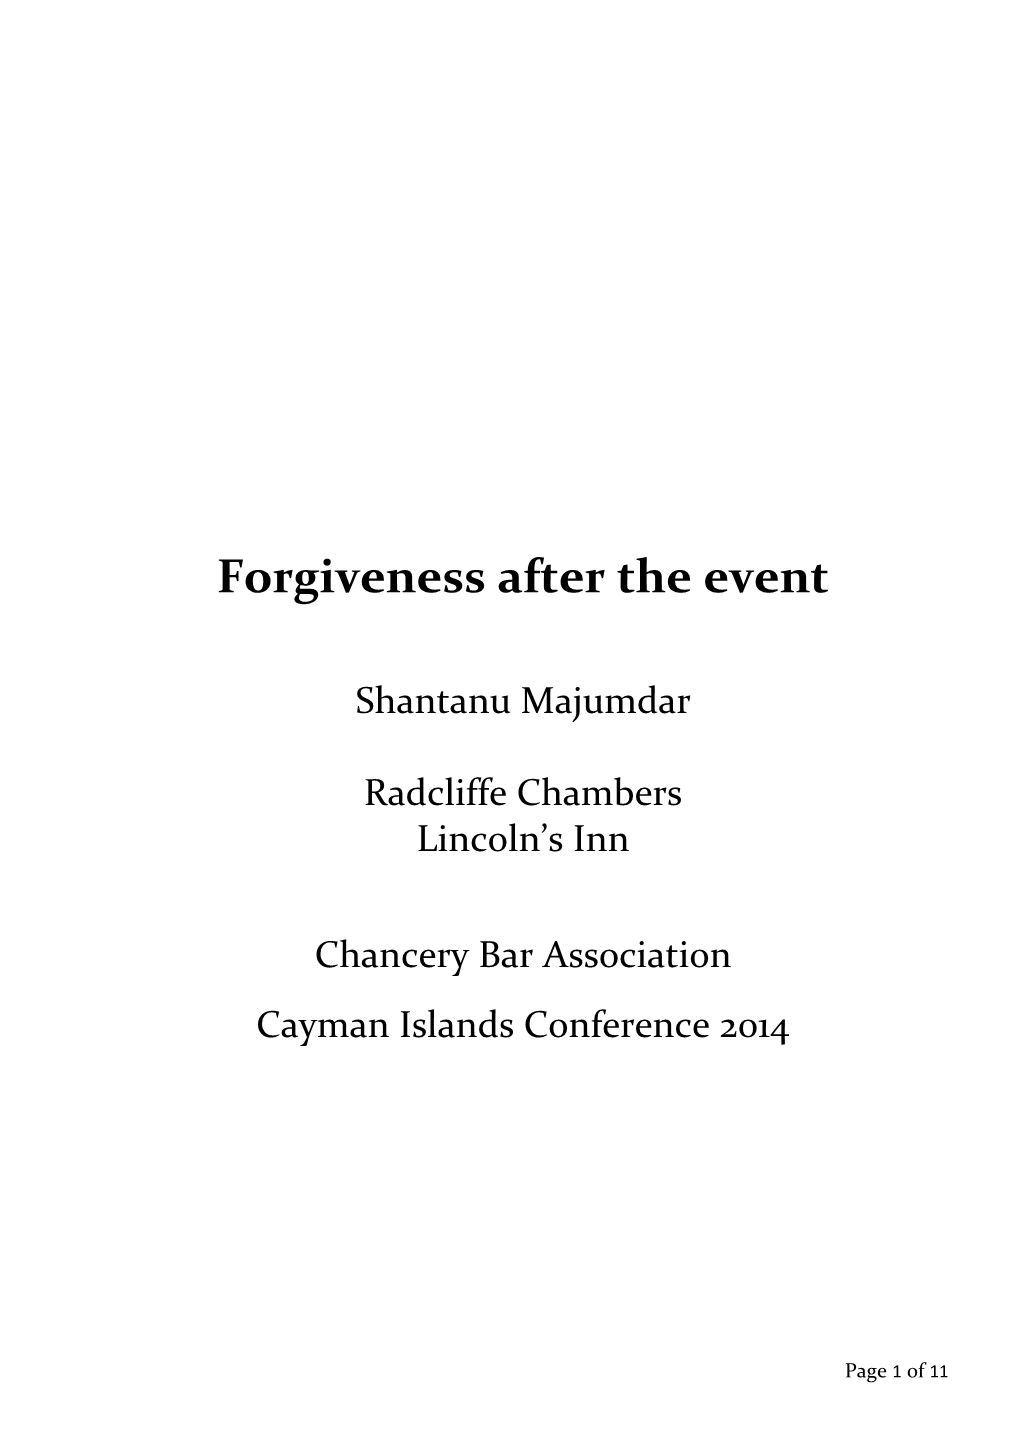 Forgiveness After the Event